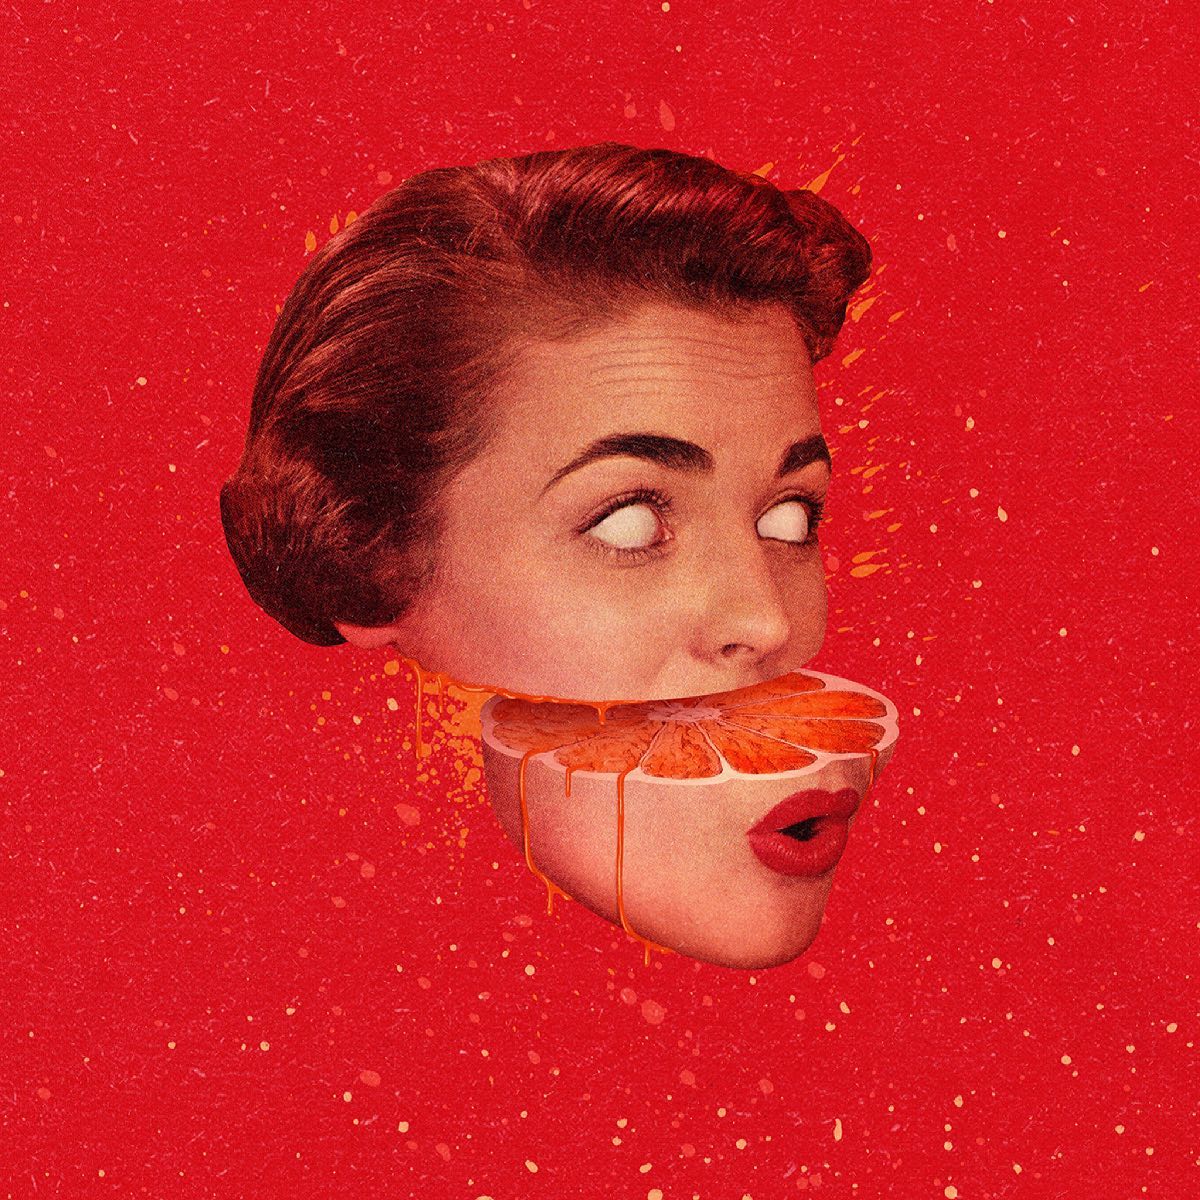 Dive Into The Surreal Digital Collages Of Mendez Mendez (2)